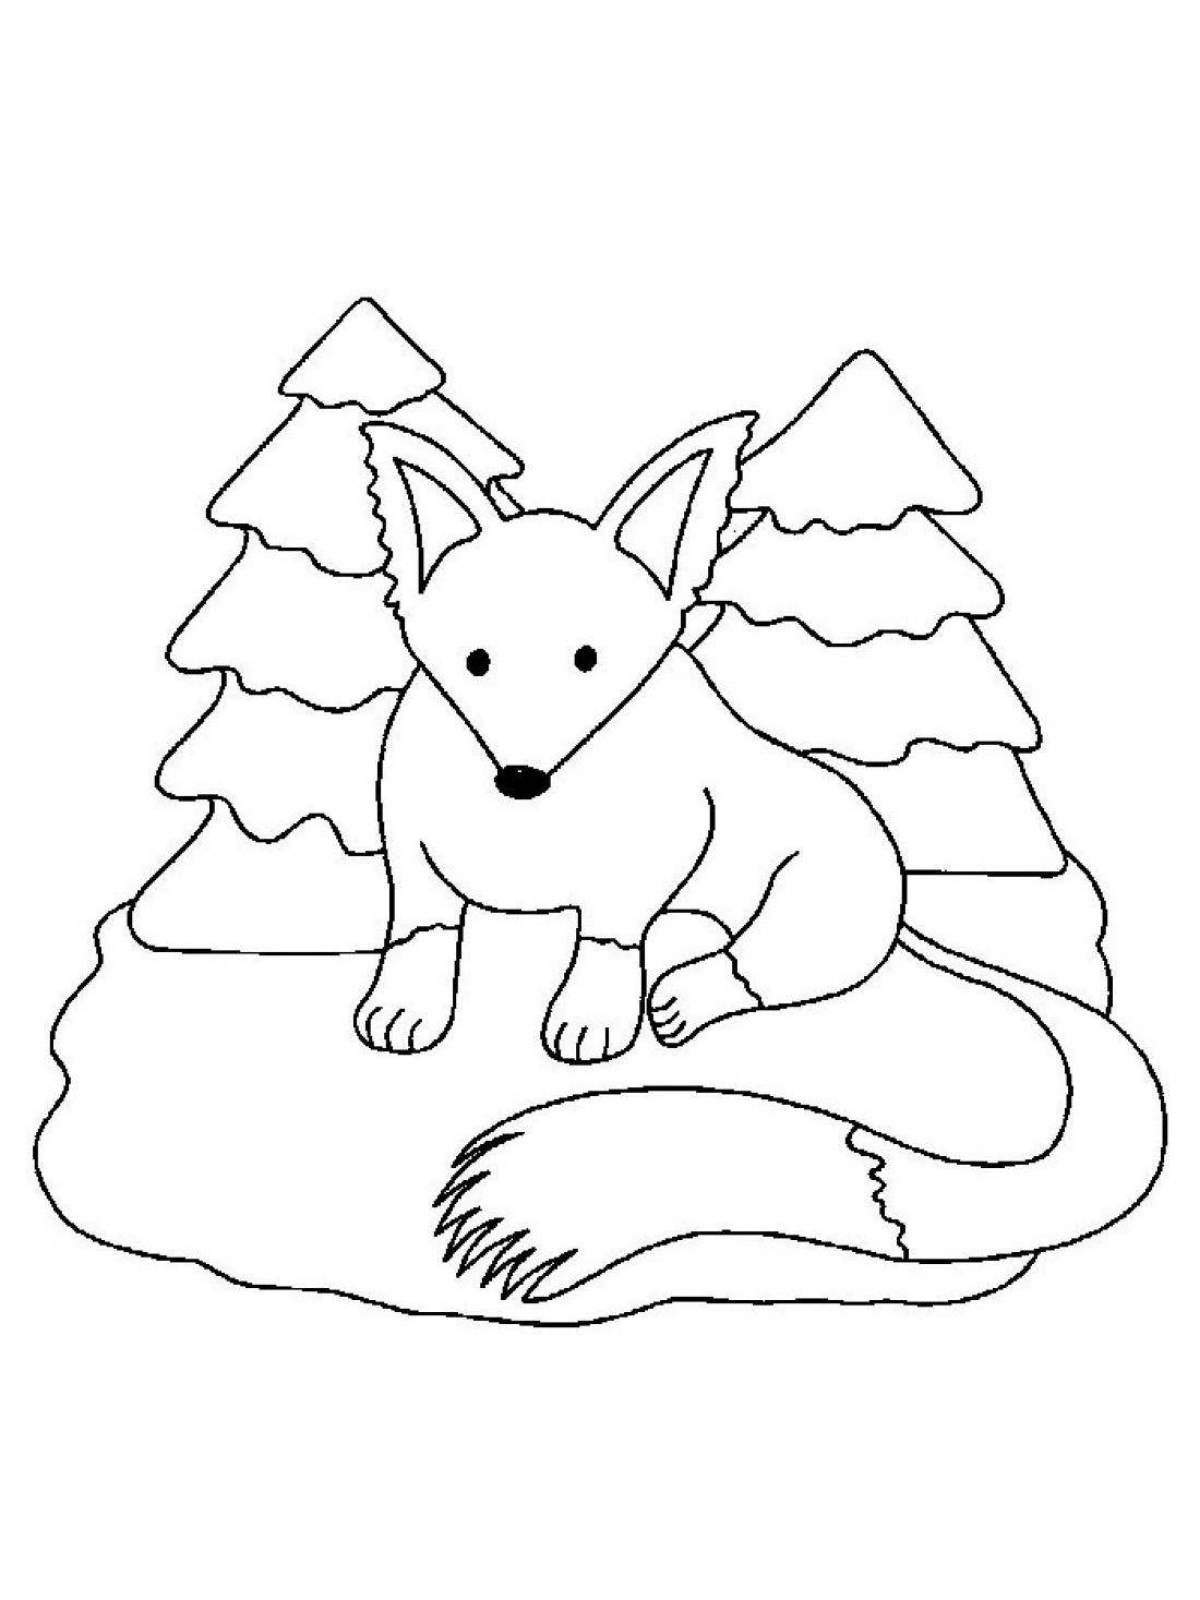 Fun coloring book winter in the forest